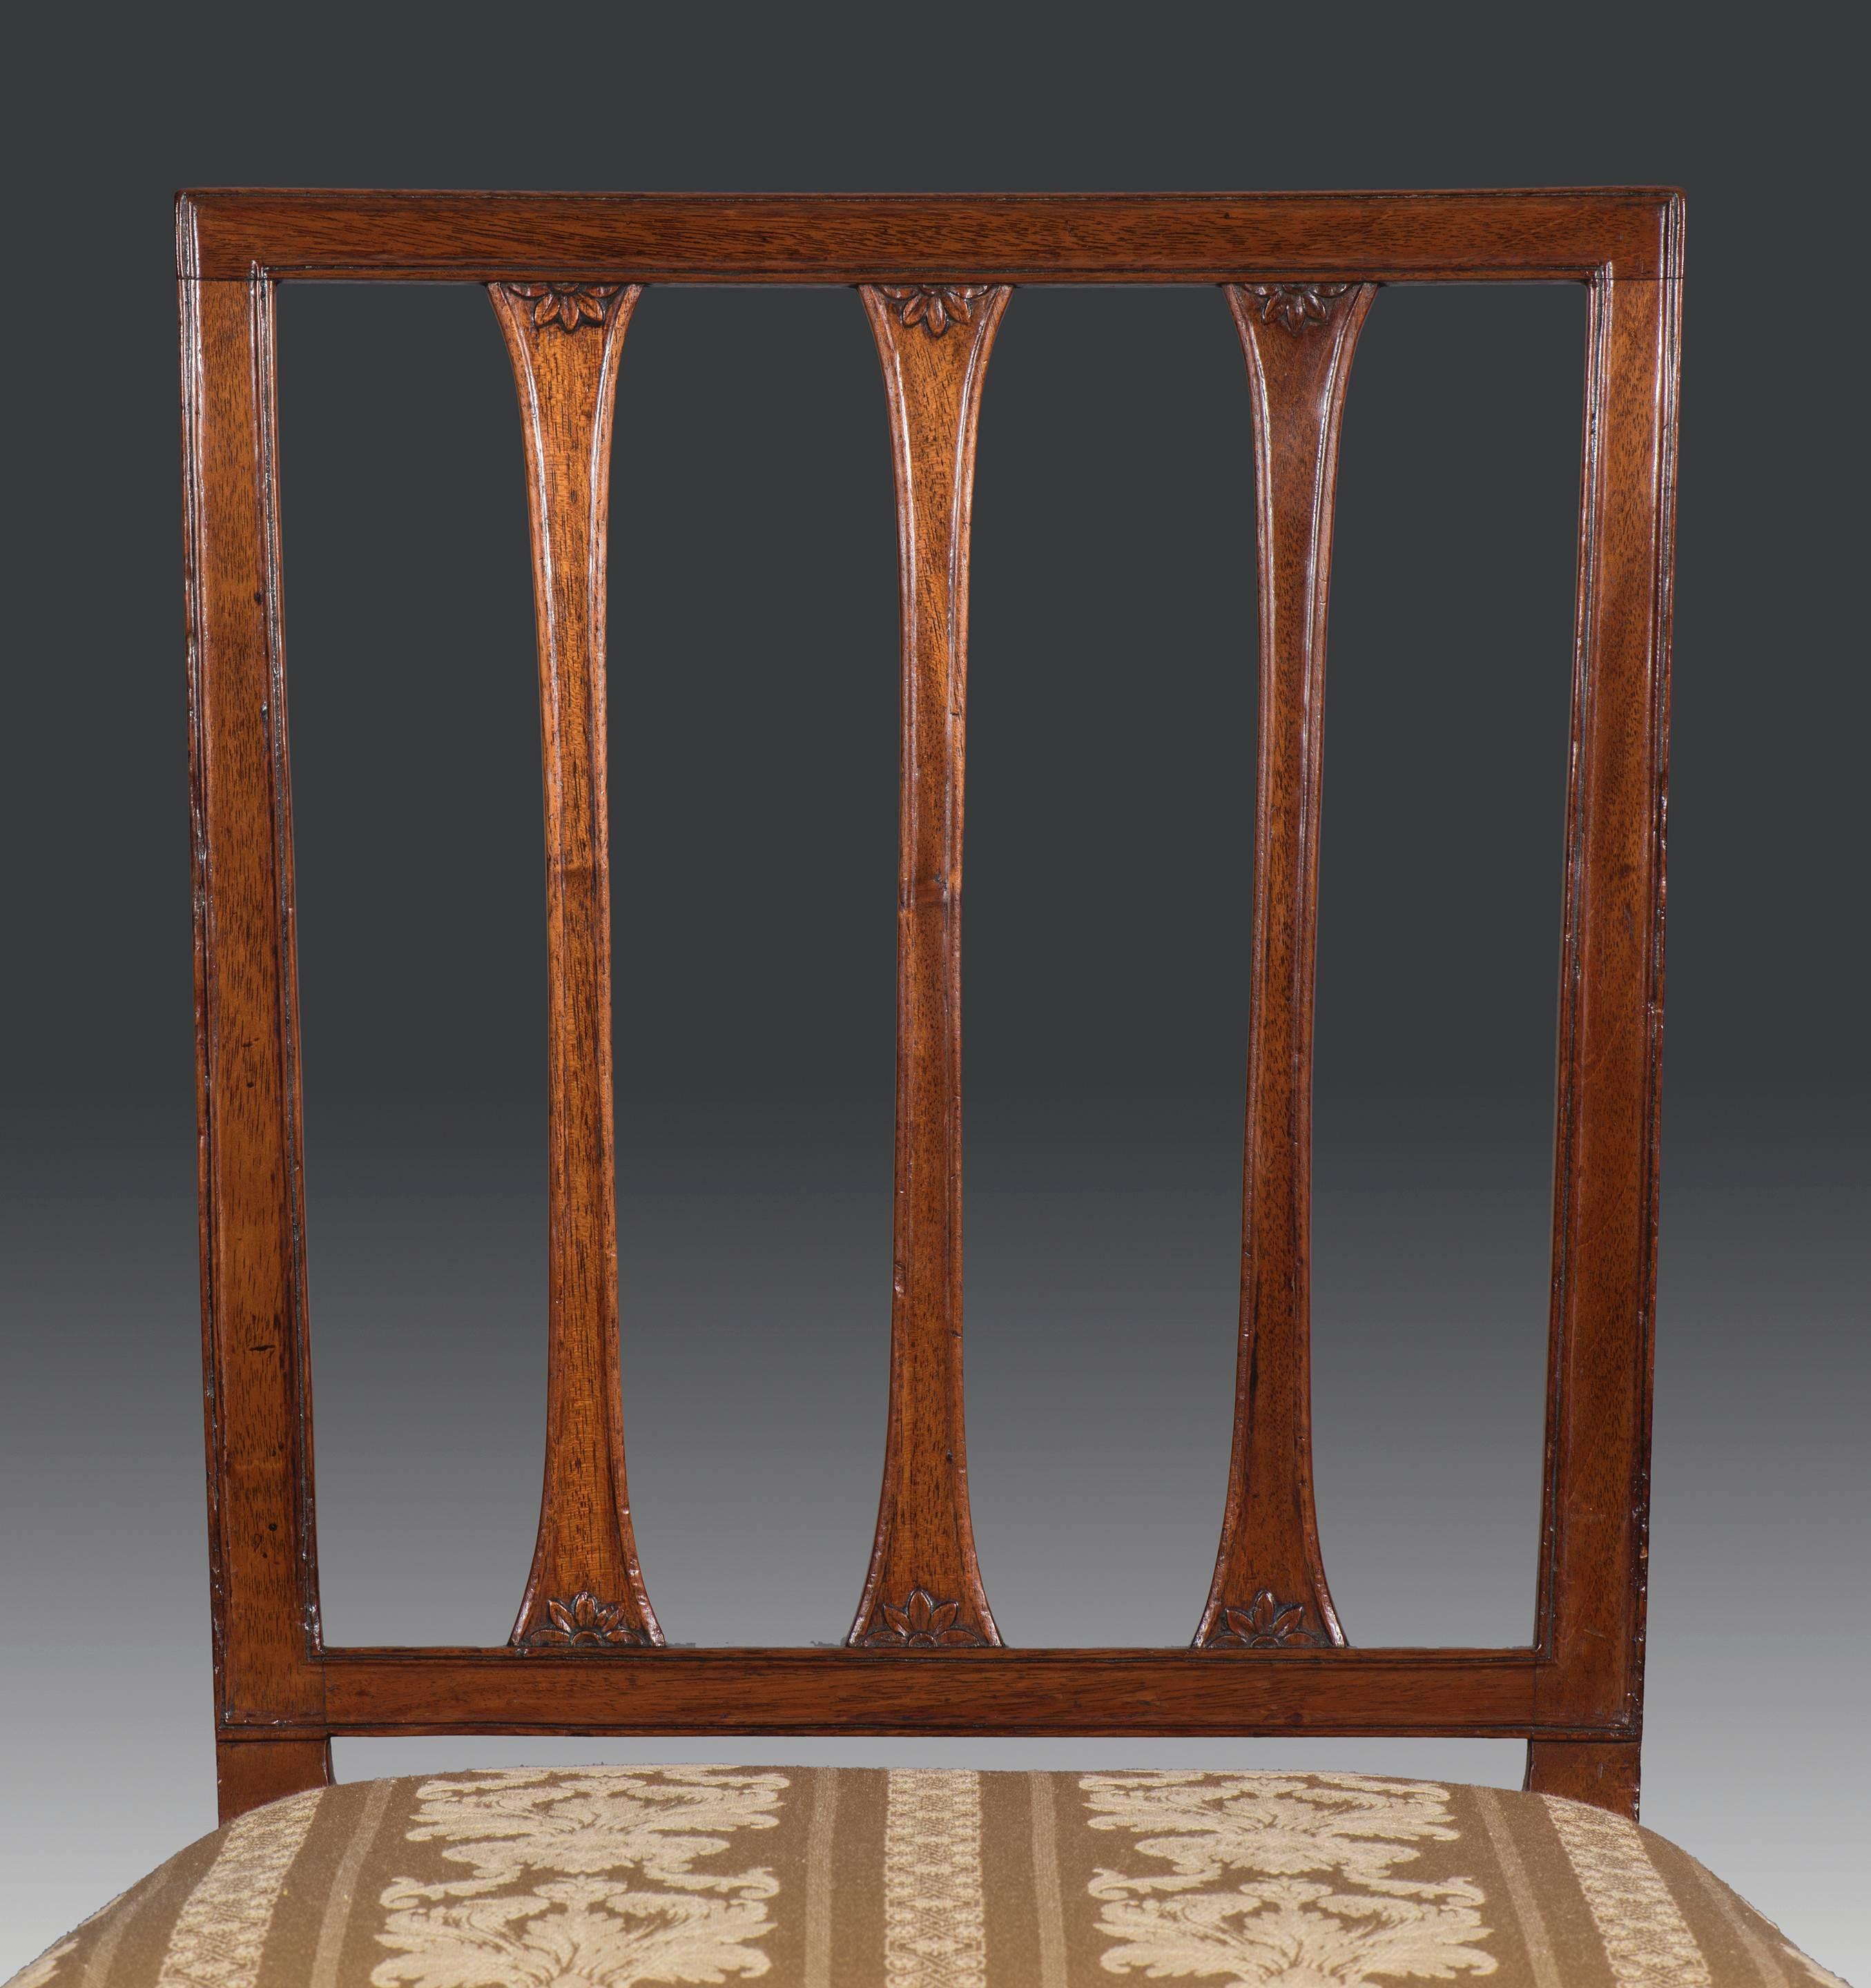 Set of 12 (10+2) George III period mahogany 18th century dining chairs with ten single chairs and 'his and hers' carvers. The rectangular bar backs with shaped and carved flower heads to the supports are elegant and very typical of the day. The